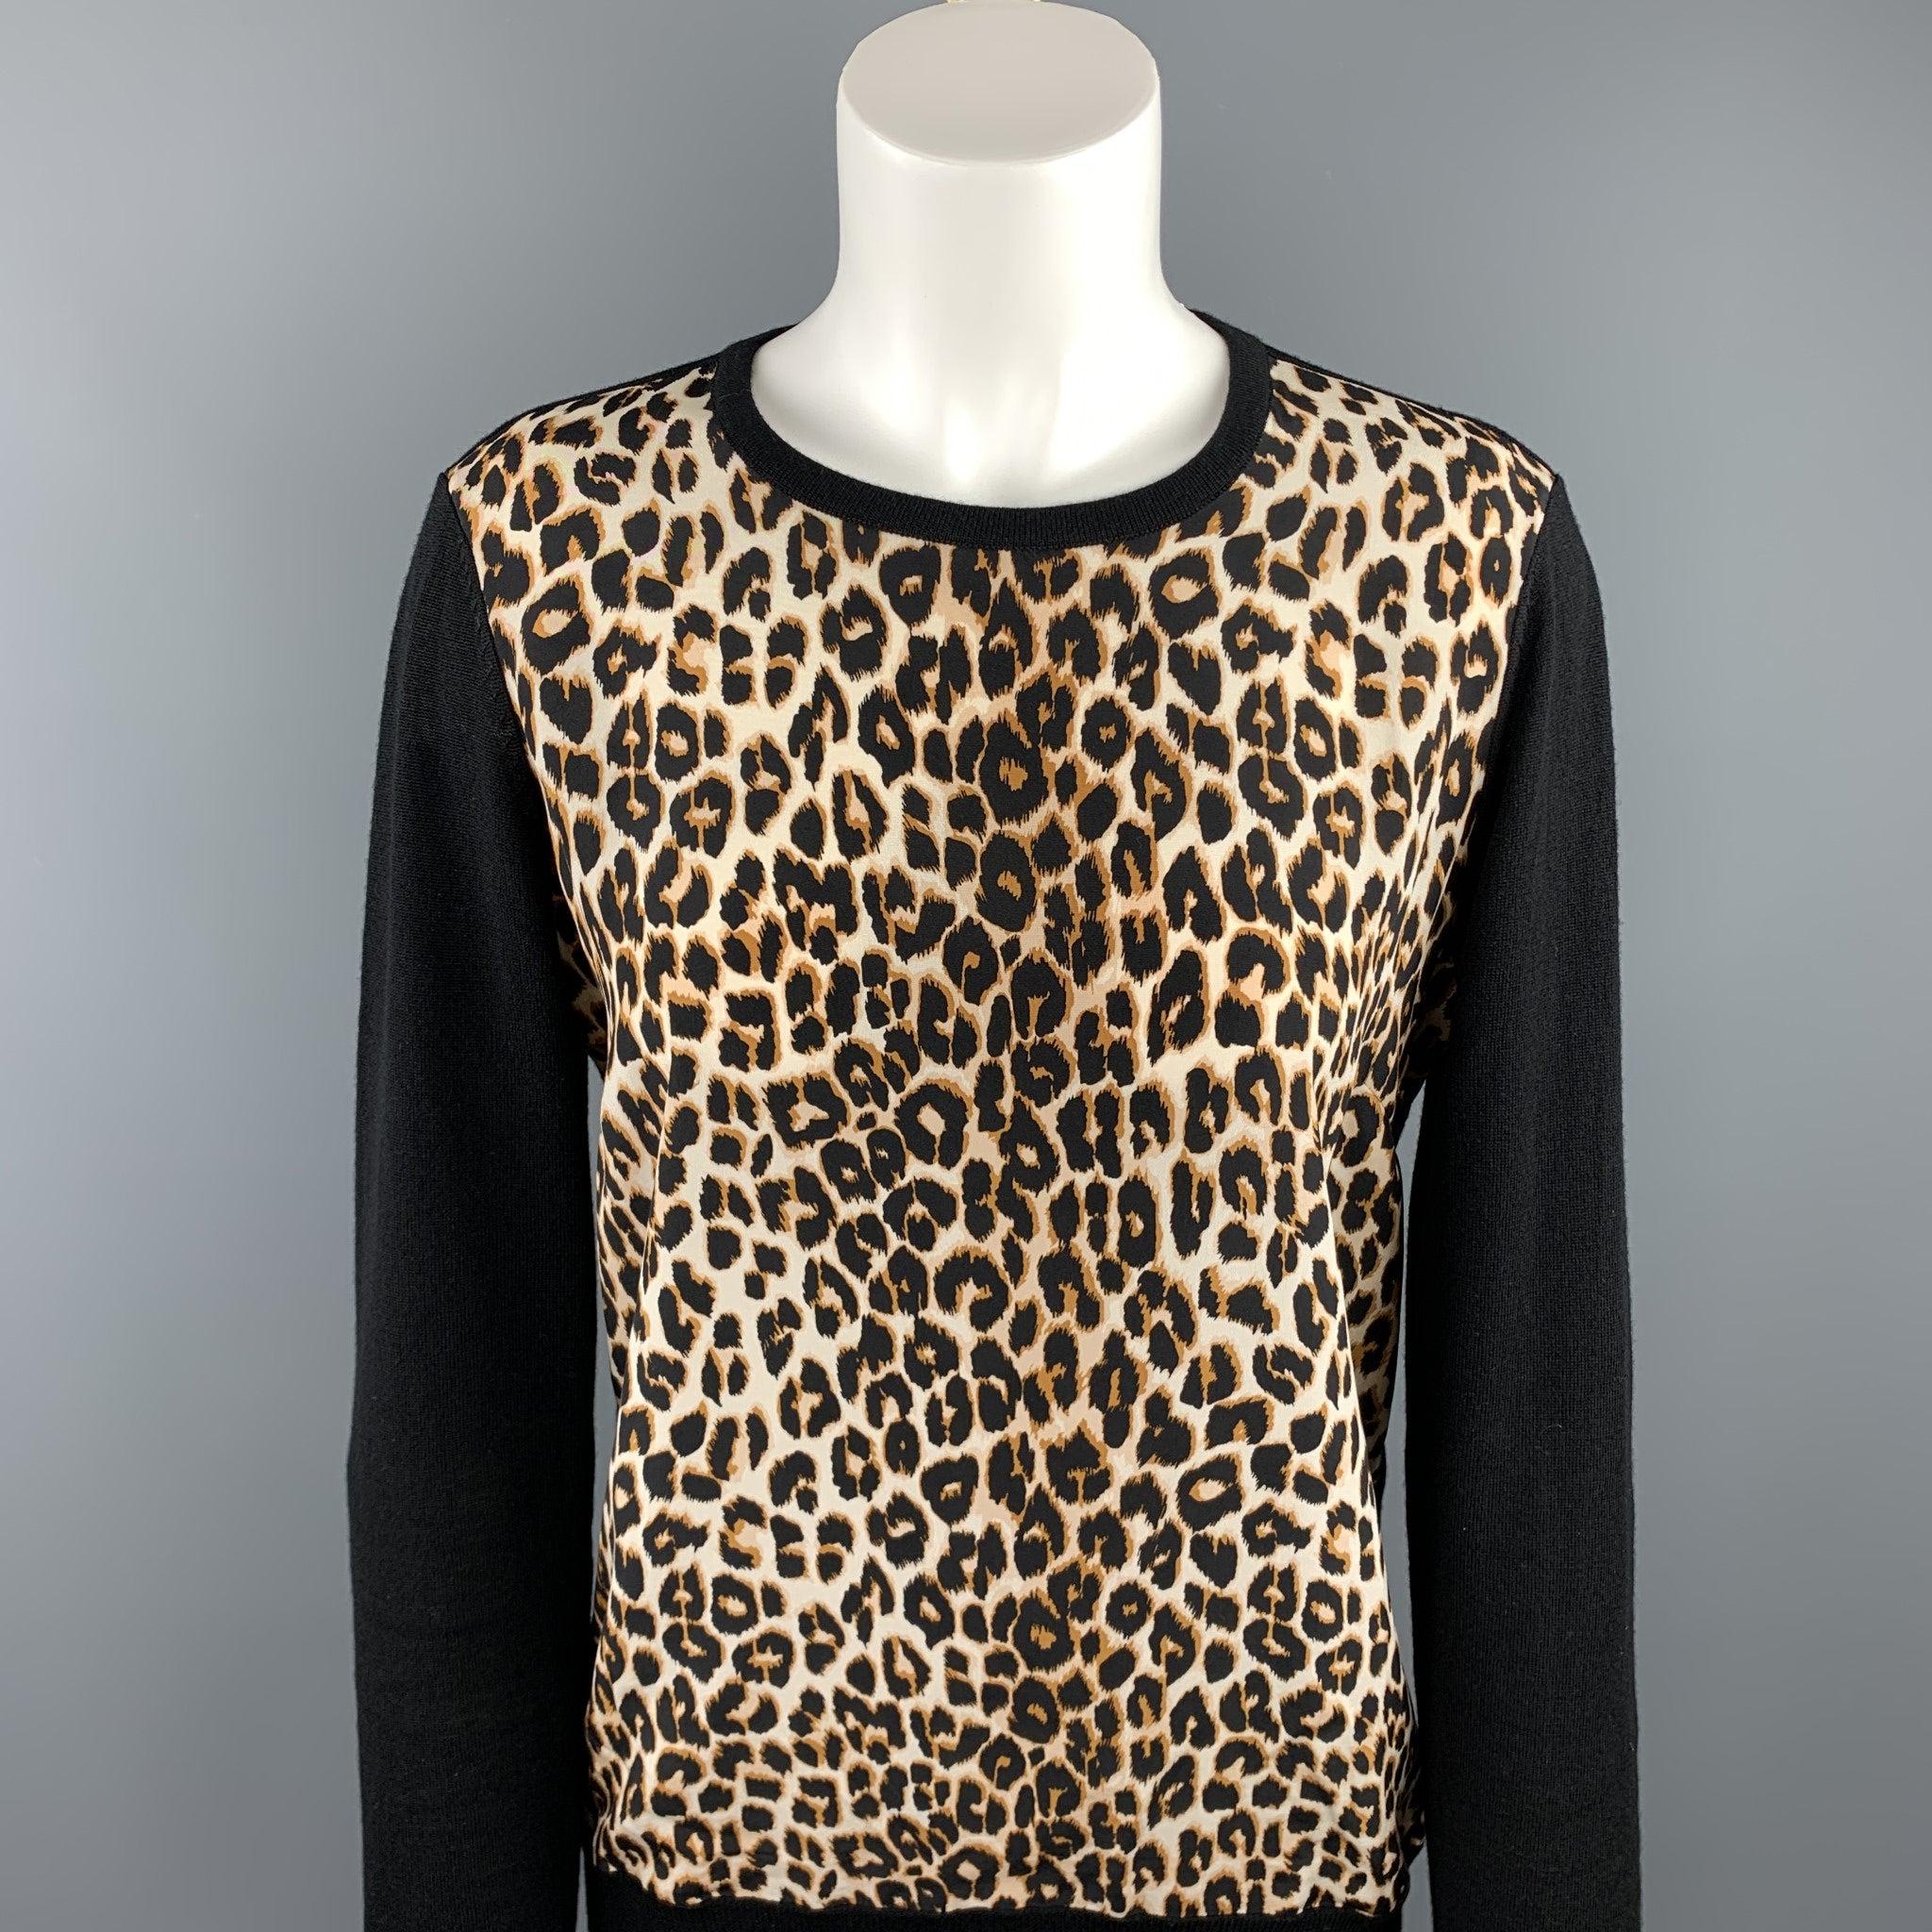 EQUIPMENT FEMME pullover comes in a black & tan leopard wool / silk featuring a crew-neck.Excellent Pre-Owned Condition. 

Marked:  XS

Measurements: 
 
Shoulder: 16 inches 
Bust: 36 inches 
Sleeve: 25 inches 
Length: 24.5 inches 

  
  
